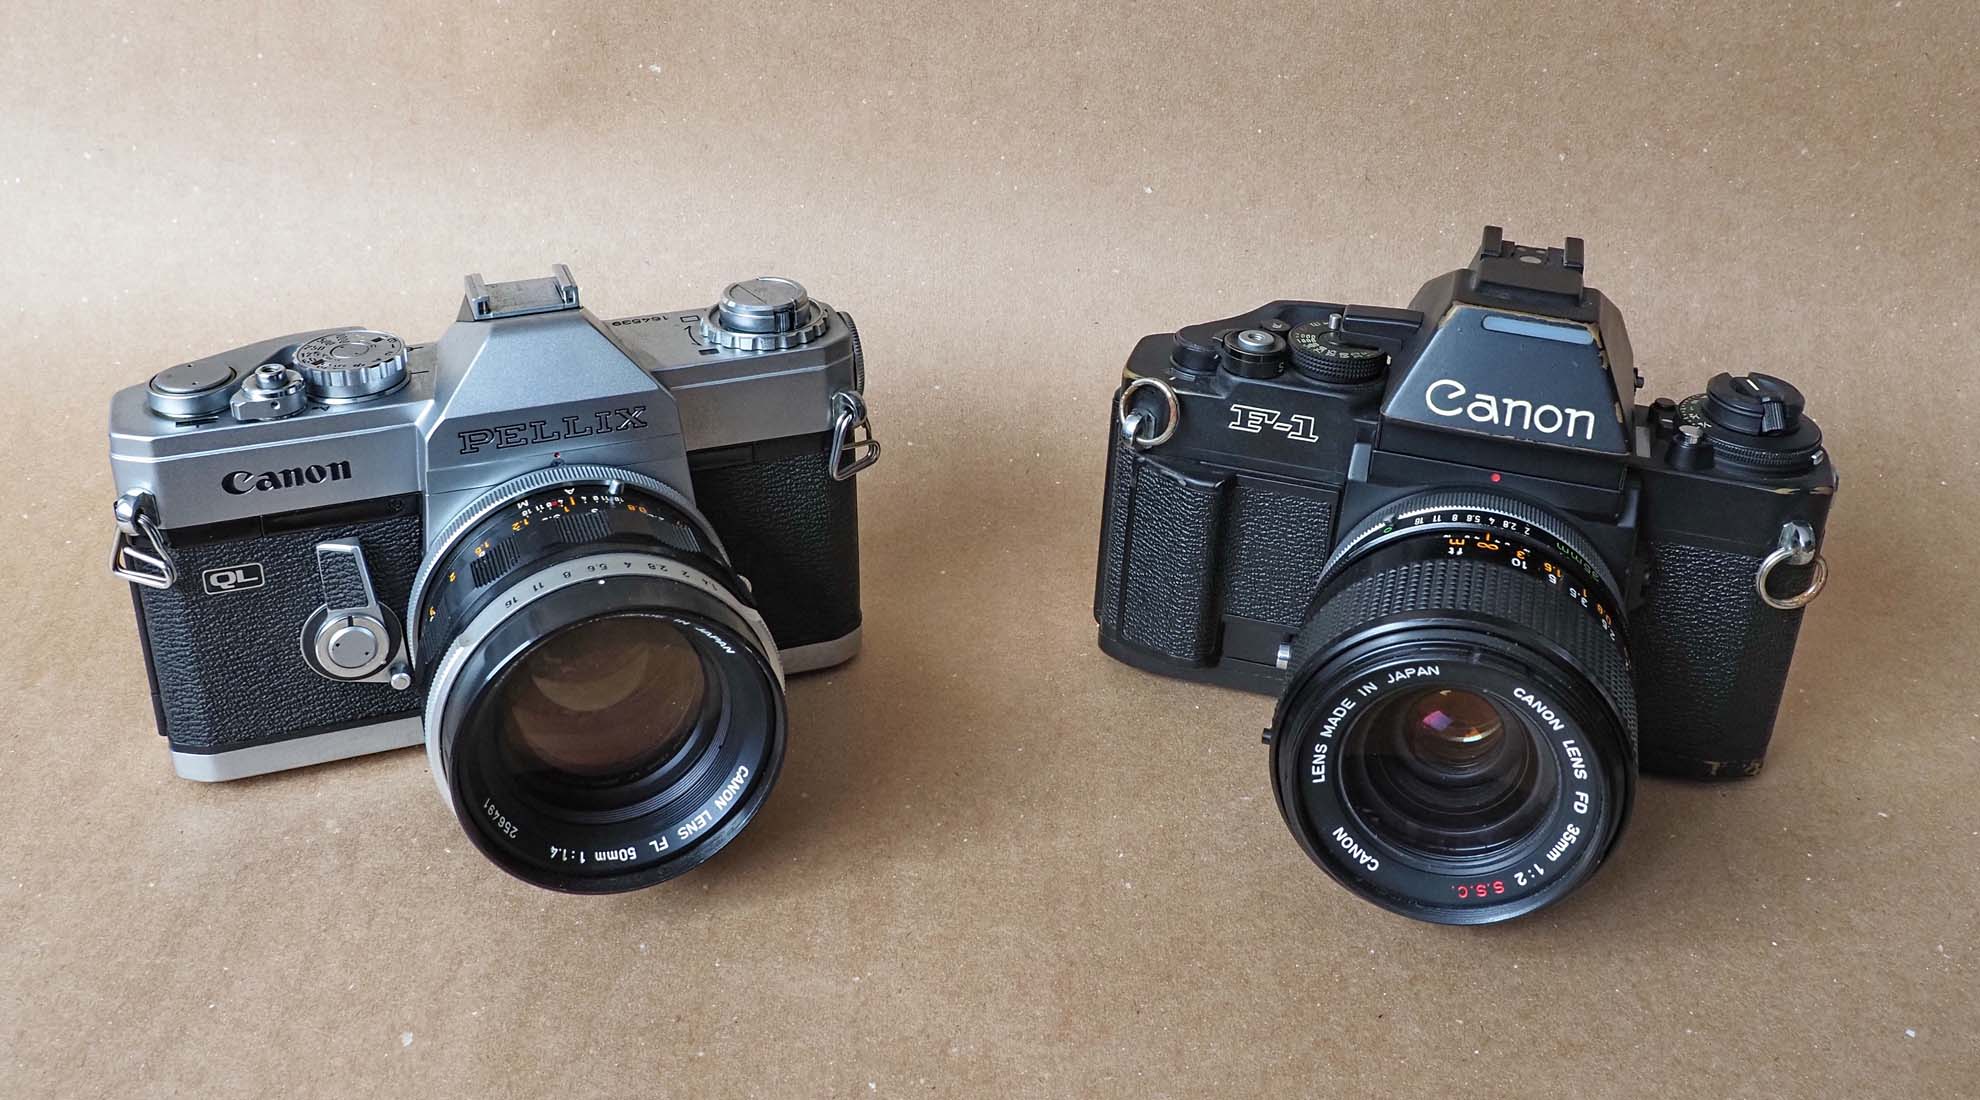 Canon Pellix (1965, with a FL lens) and Canon F1n (1981). 